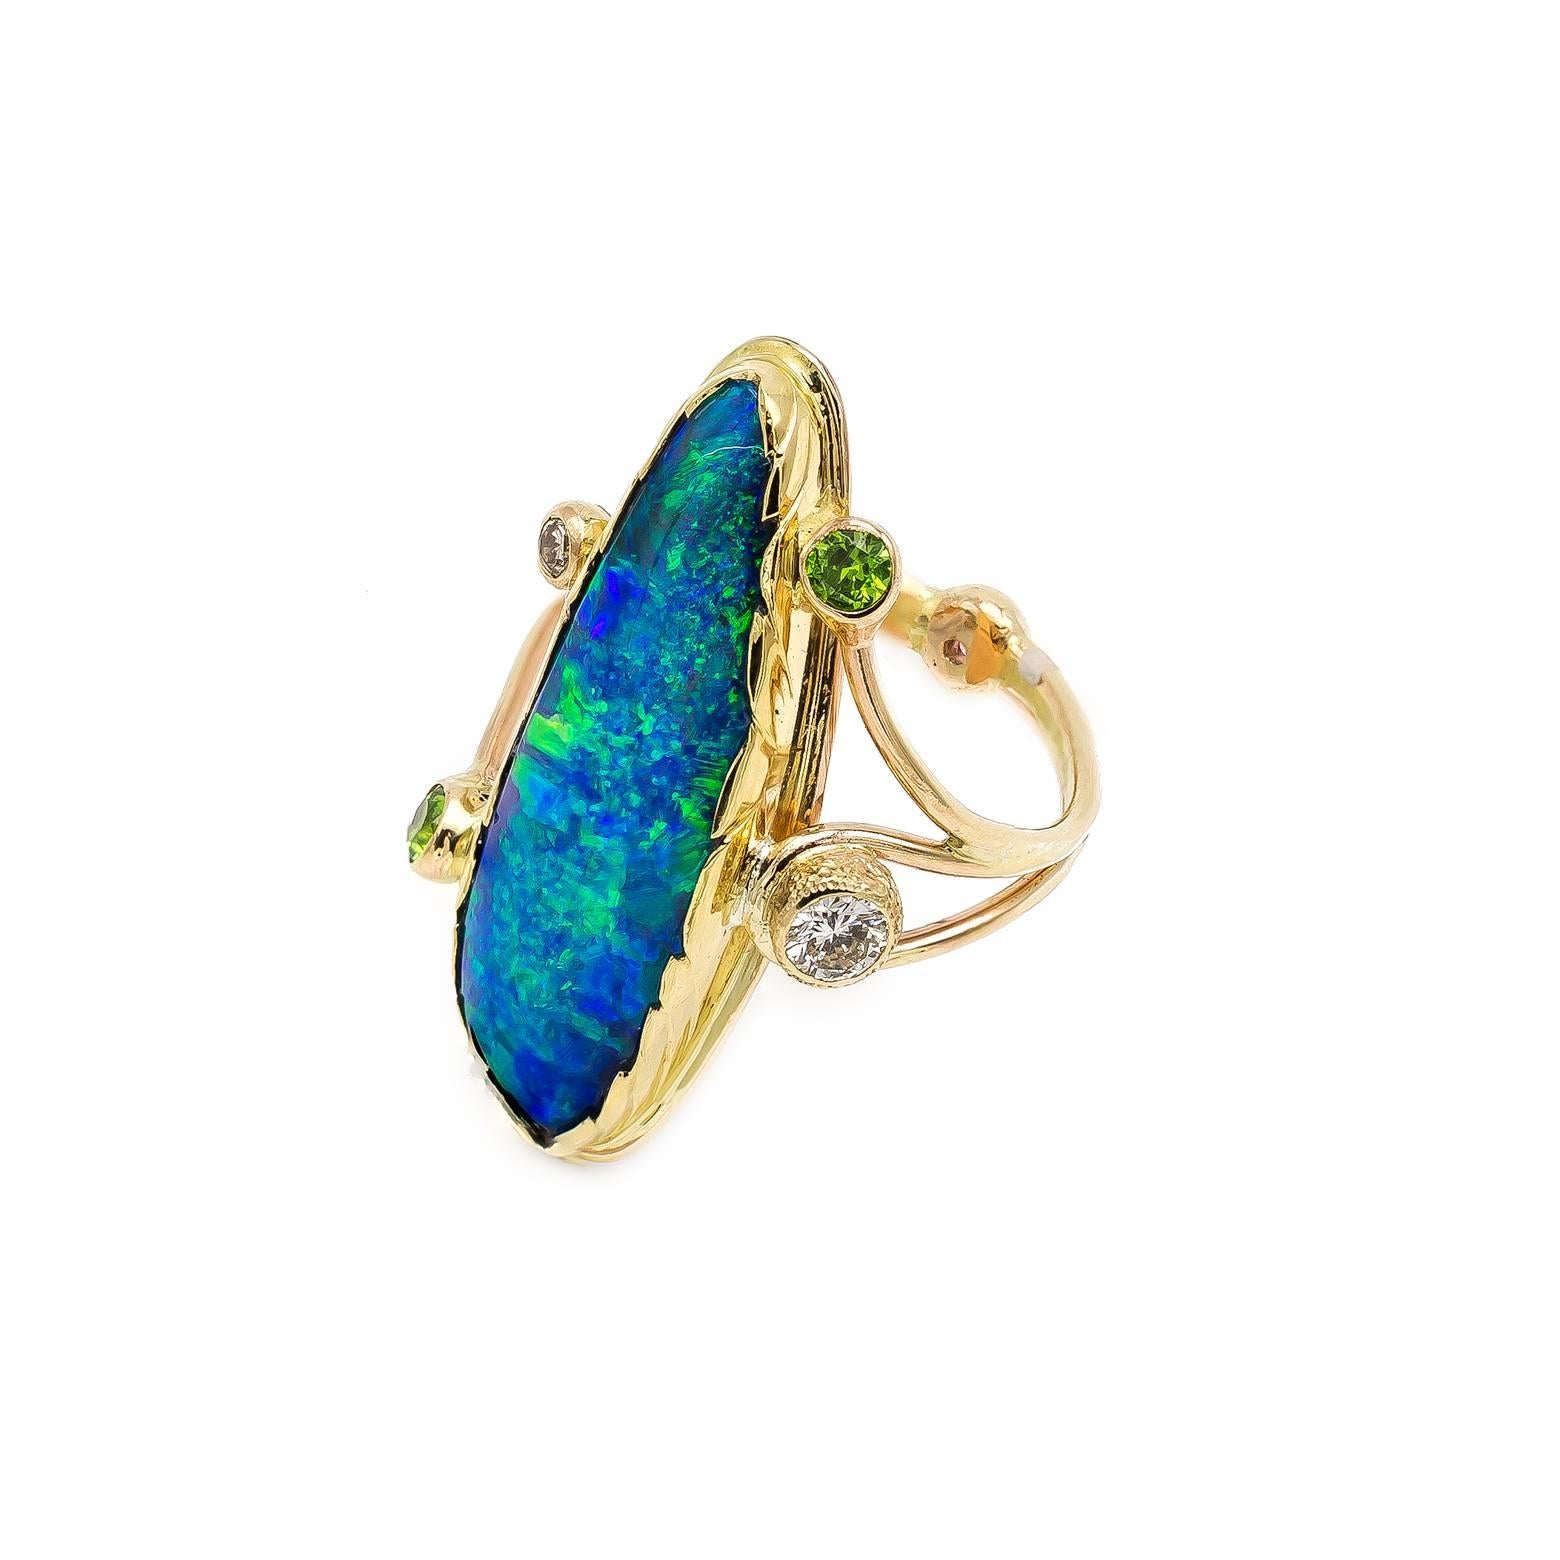 Artist Large Boulder Opal Ring with Green Garnets and White Sapphires Set in Gold